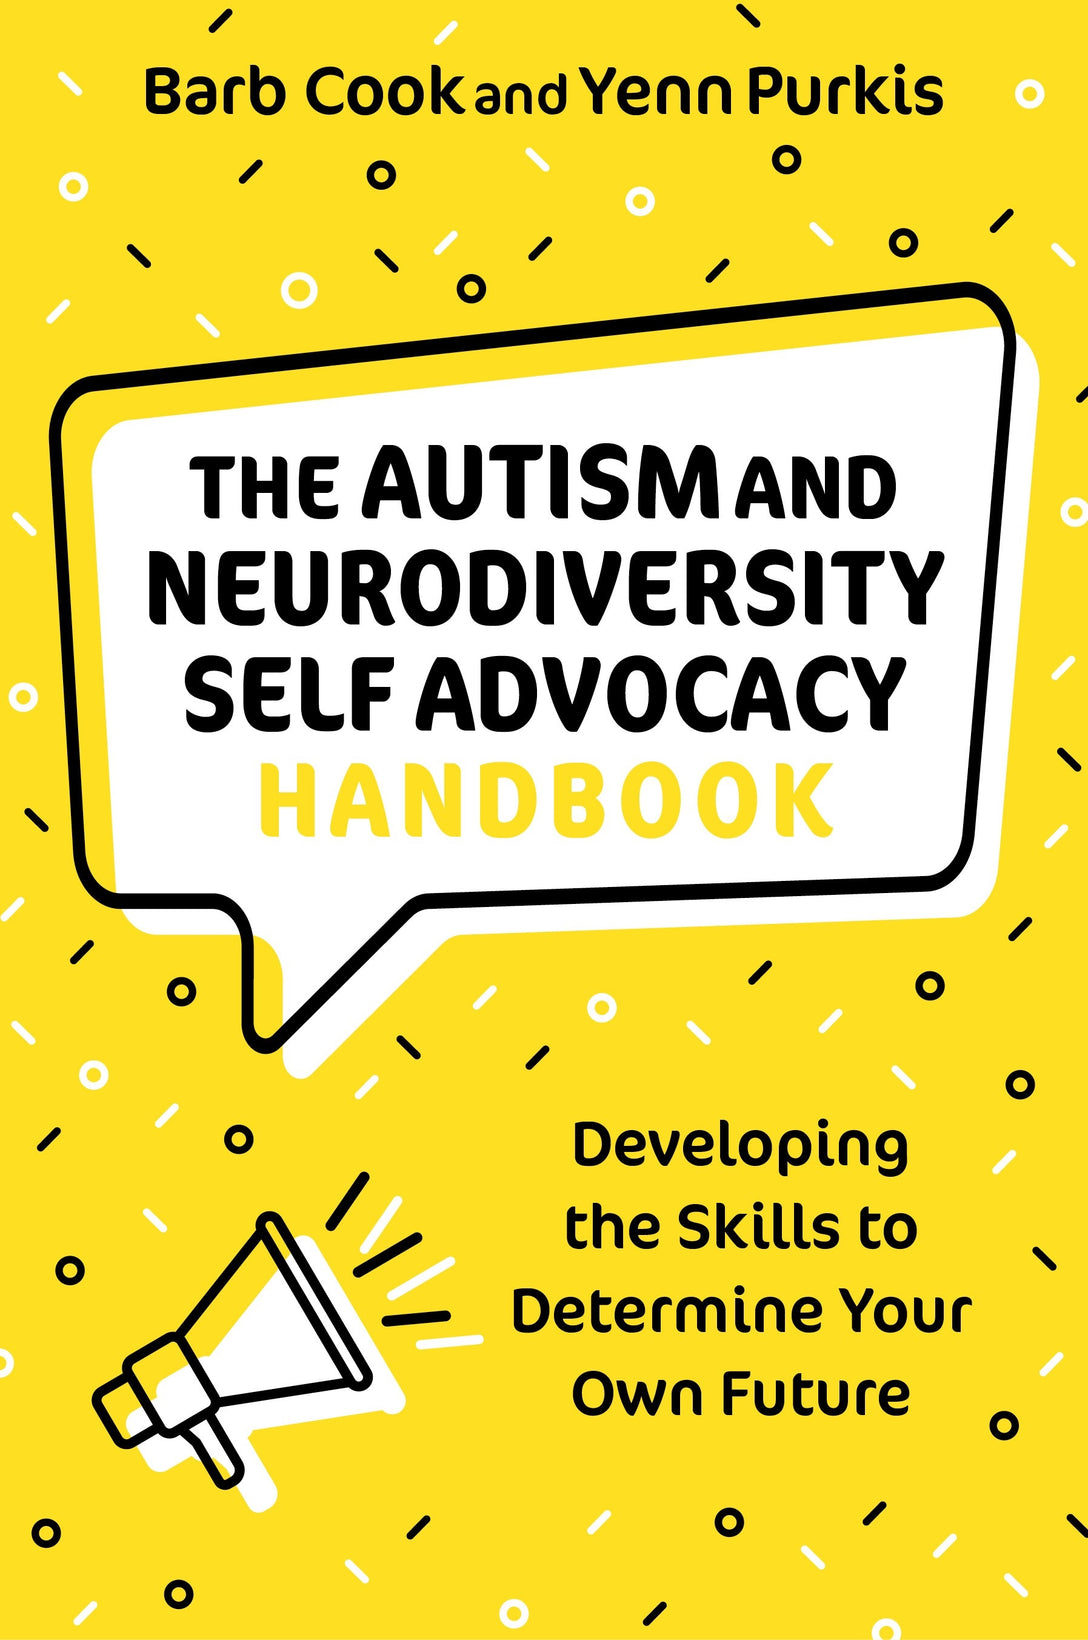 The Autism and Neurodiversity Self Advocacy Handbook by Yenn Purkis, Barb Cook